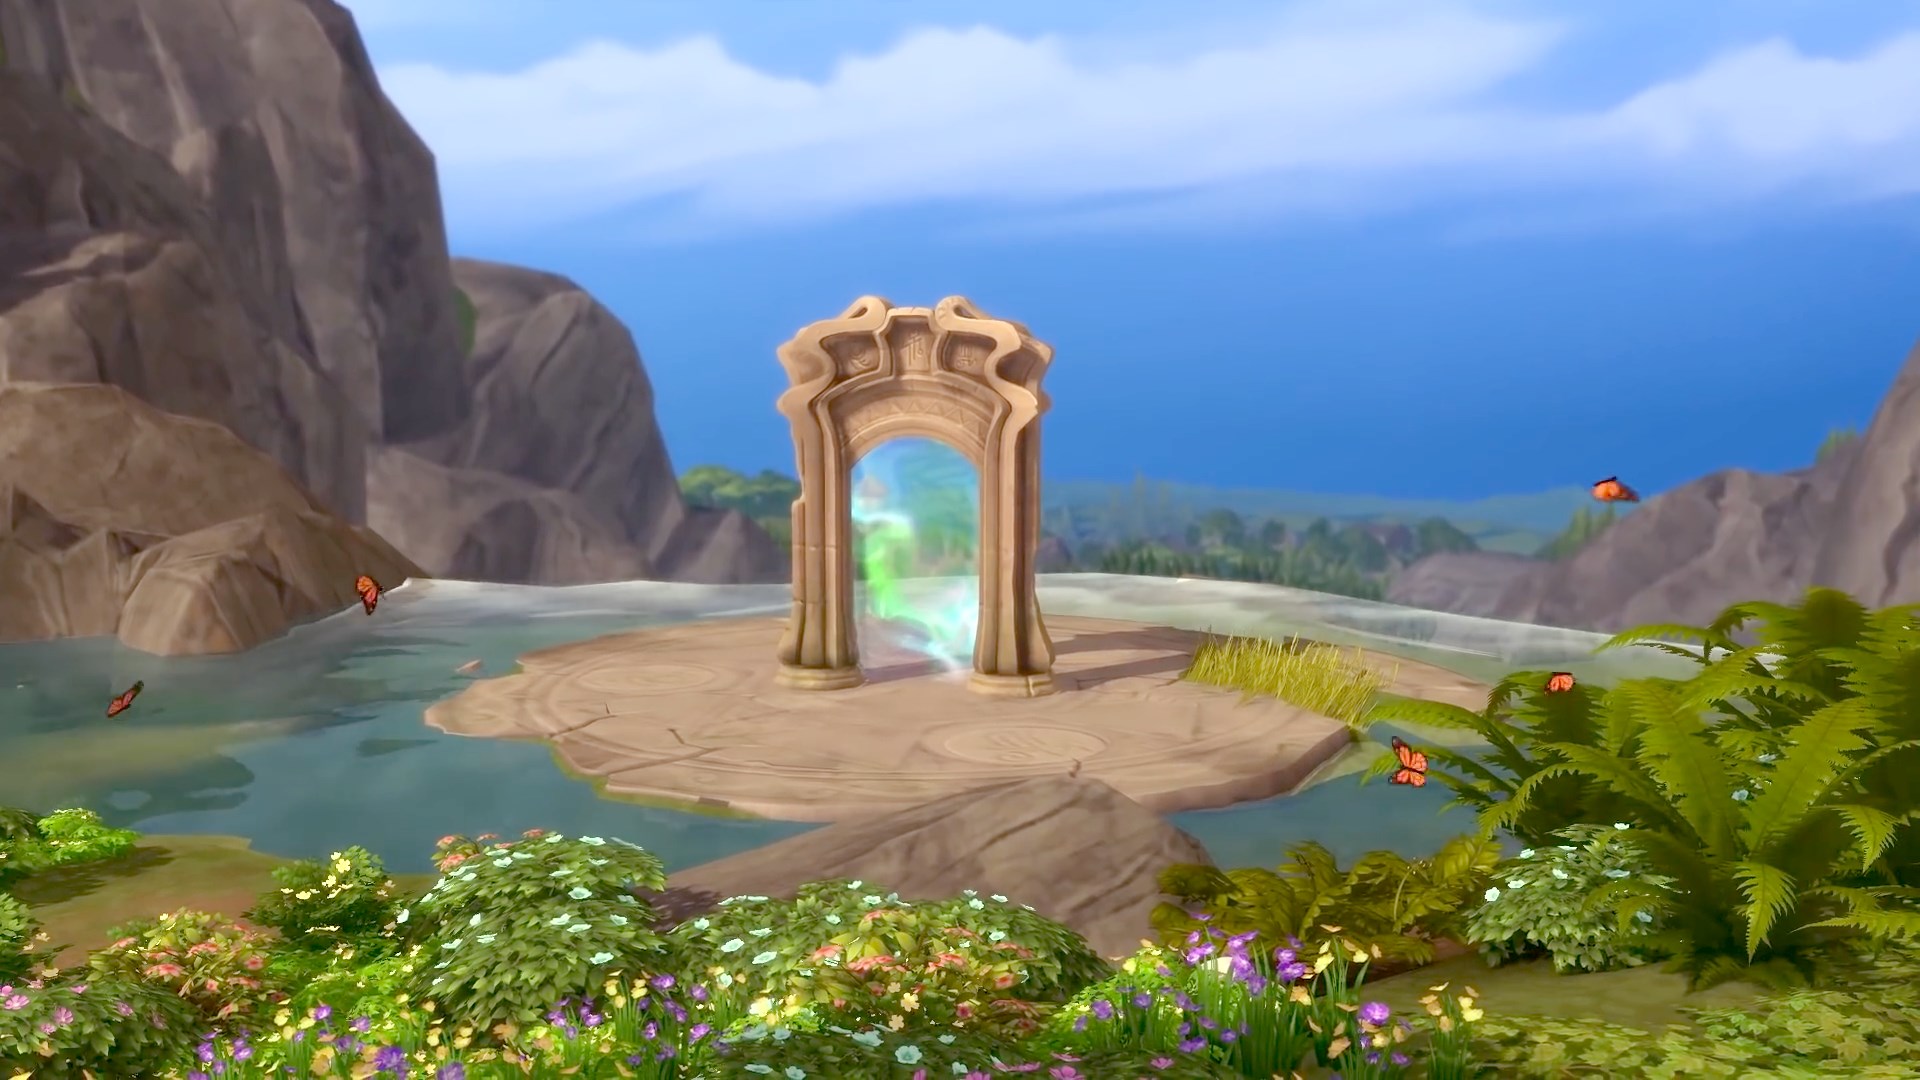 The Sims 4 Realm of Magic 1.55.105.1020 All in One Portable [September 2019] - The Sim Architect